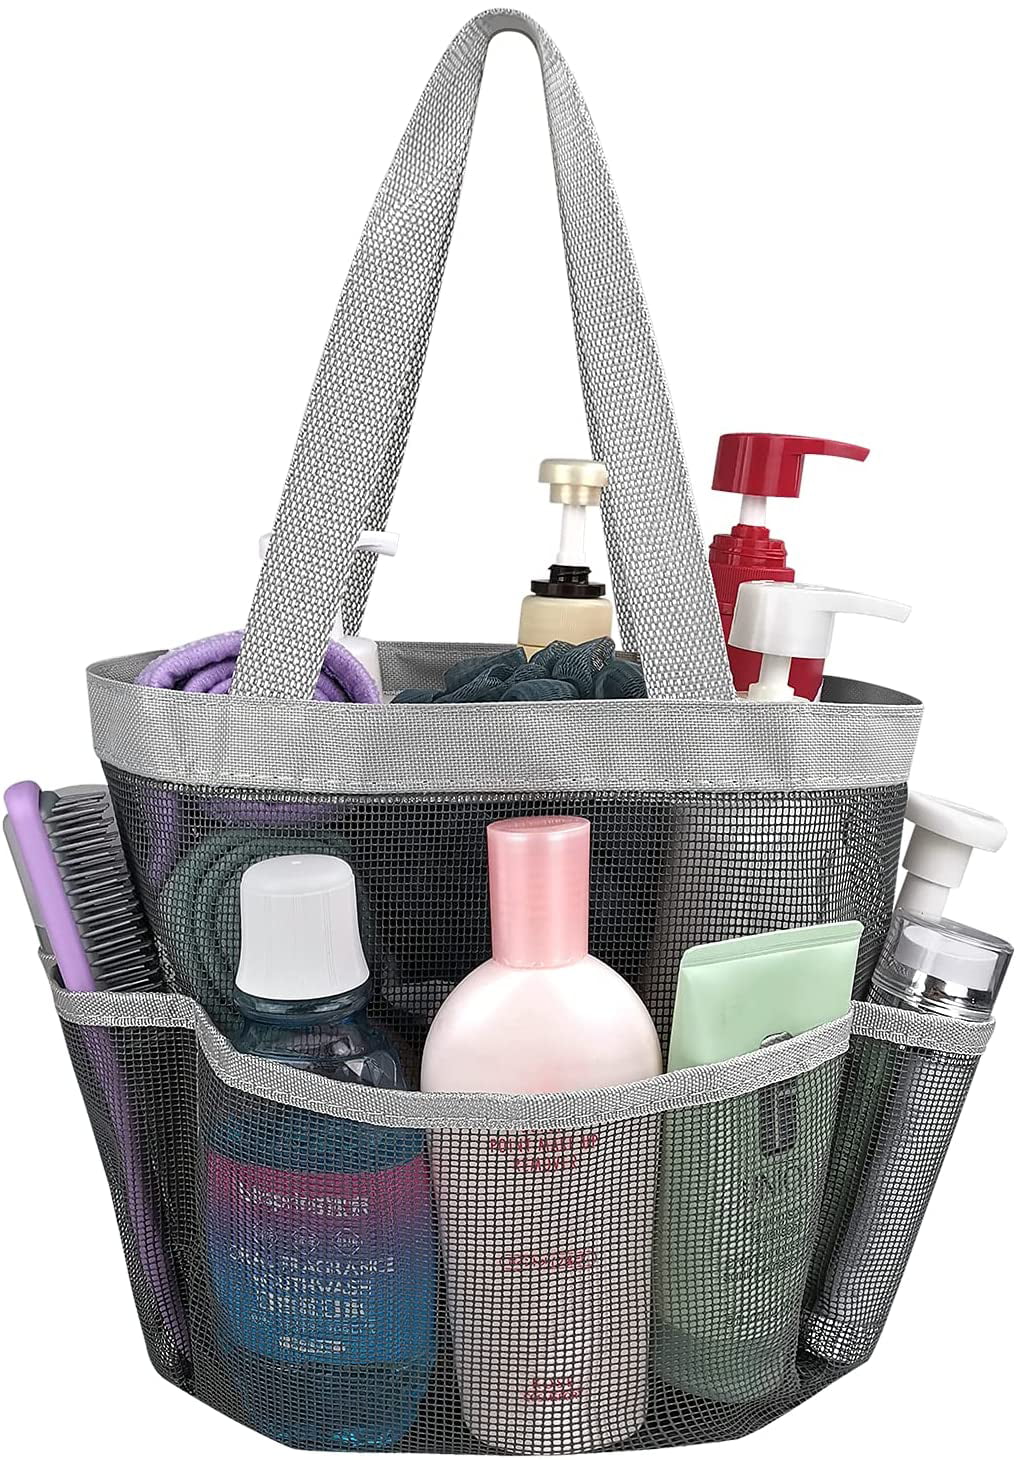 Dorm Storage Pouch Hanging Caddy Organizer Carry Toiletry Shower Tote Mesh Bag 